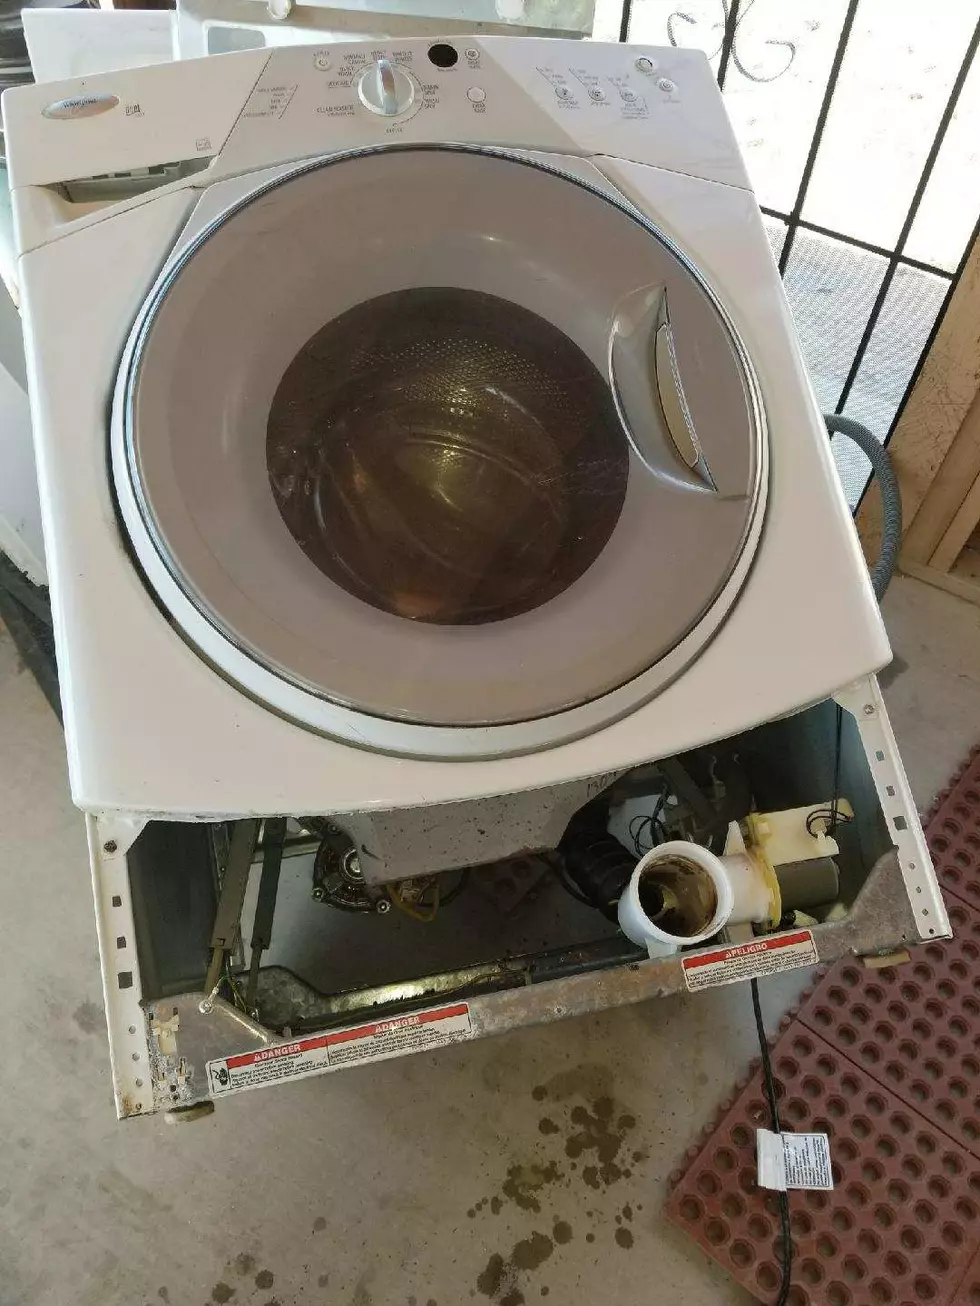 What Does It Take To Stop Up A Washing Machine?